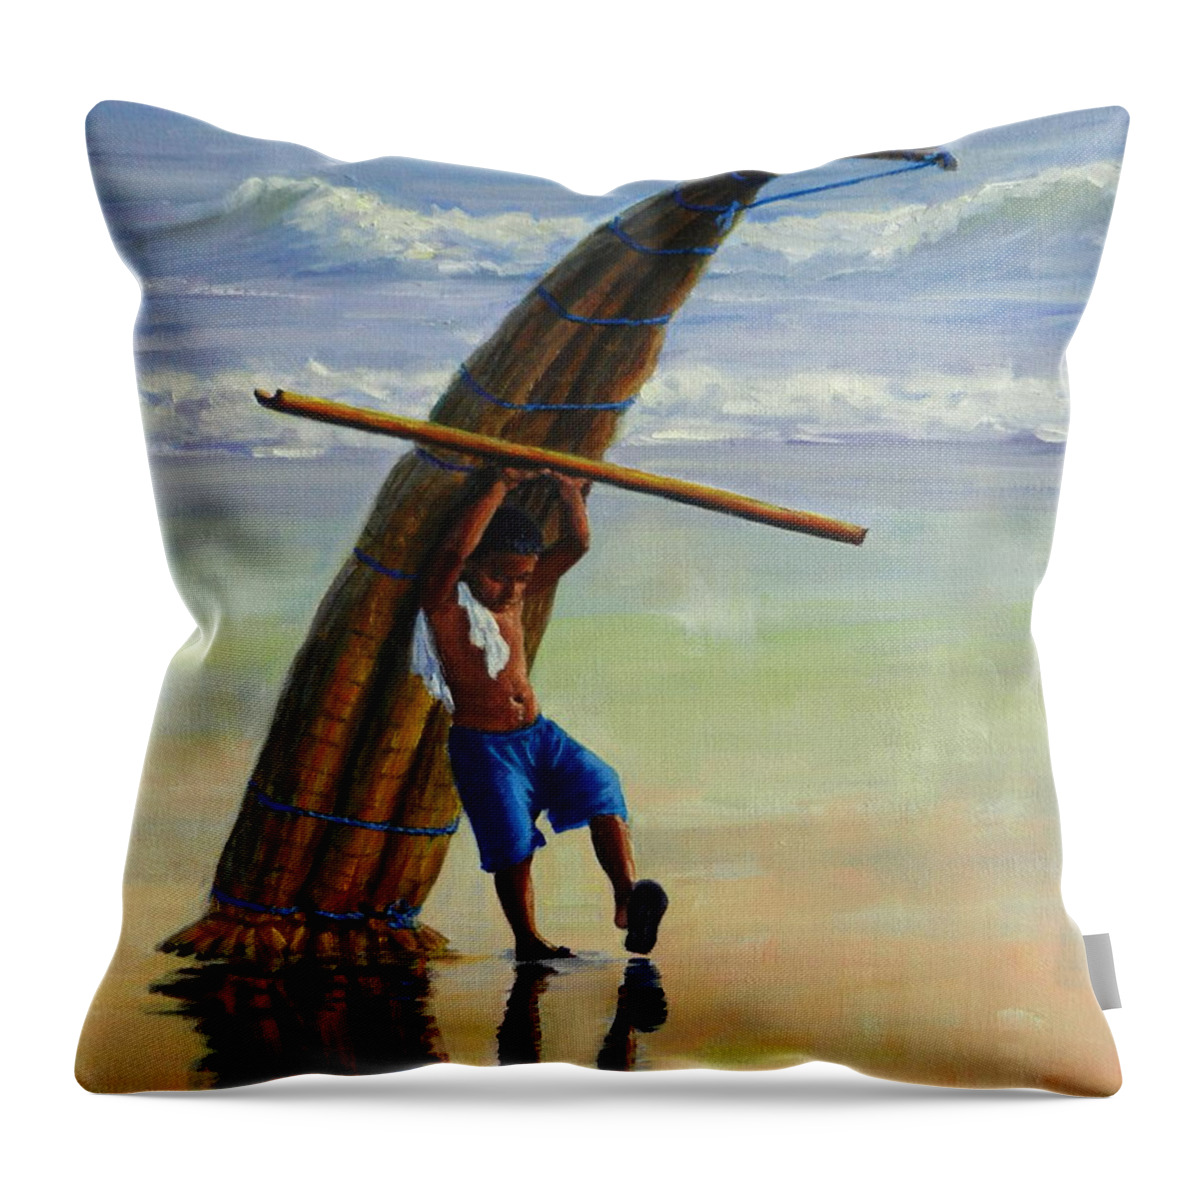 Ocean Throw Pillow featuring the painting A boy and his Caballito de Totora, Peru Impression by Ningning Li